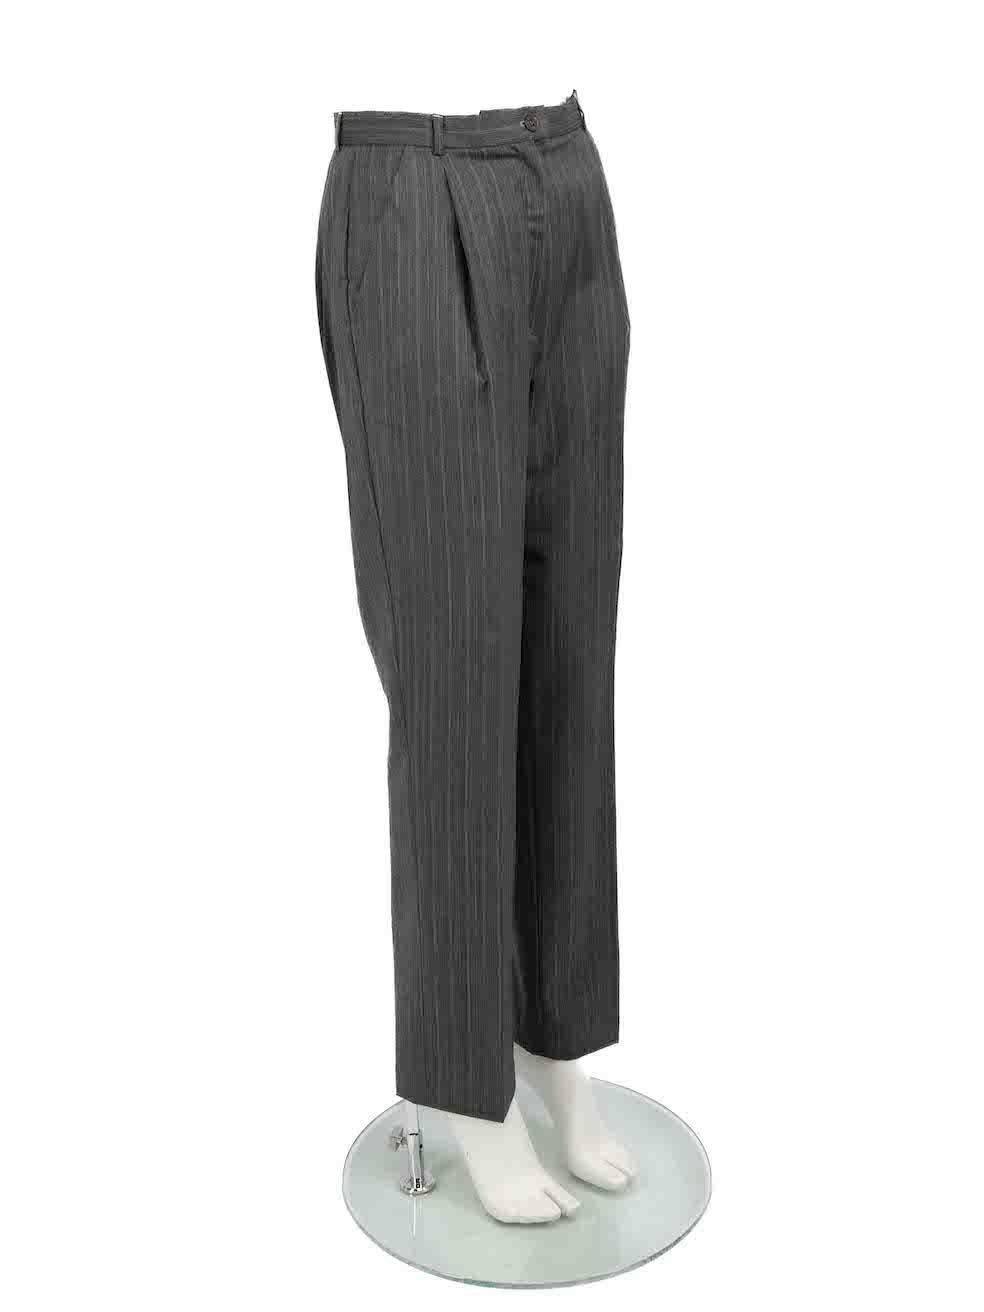 CONDITION is Very good. Minimal wear to trousers is evident. Minimal wear to the front right leg with a small hole on this used Escada designer resale item.
 
 
 
 Details
 
 
 Grey
 
 Wool
 
 Trousers
 
 Striped pattern
 
 Straight leg
 
 Mid rise
